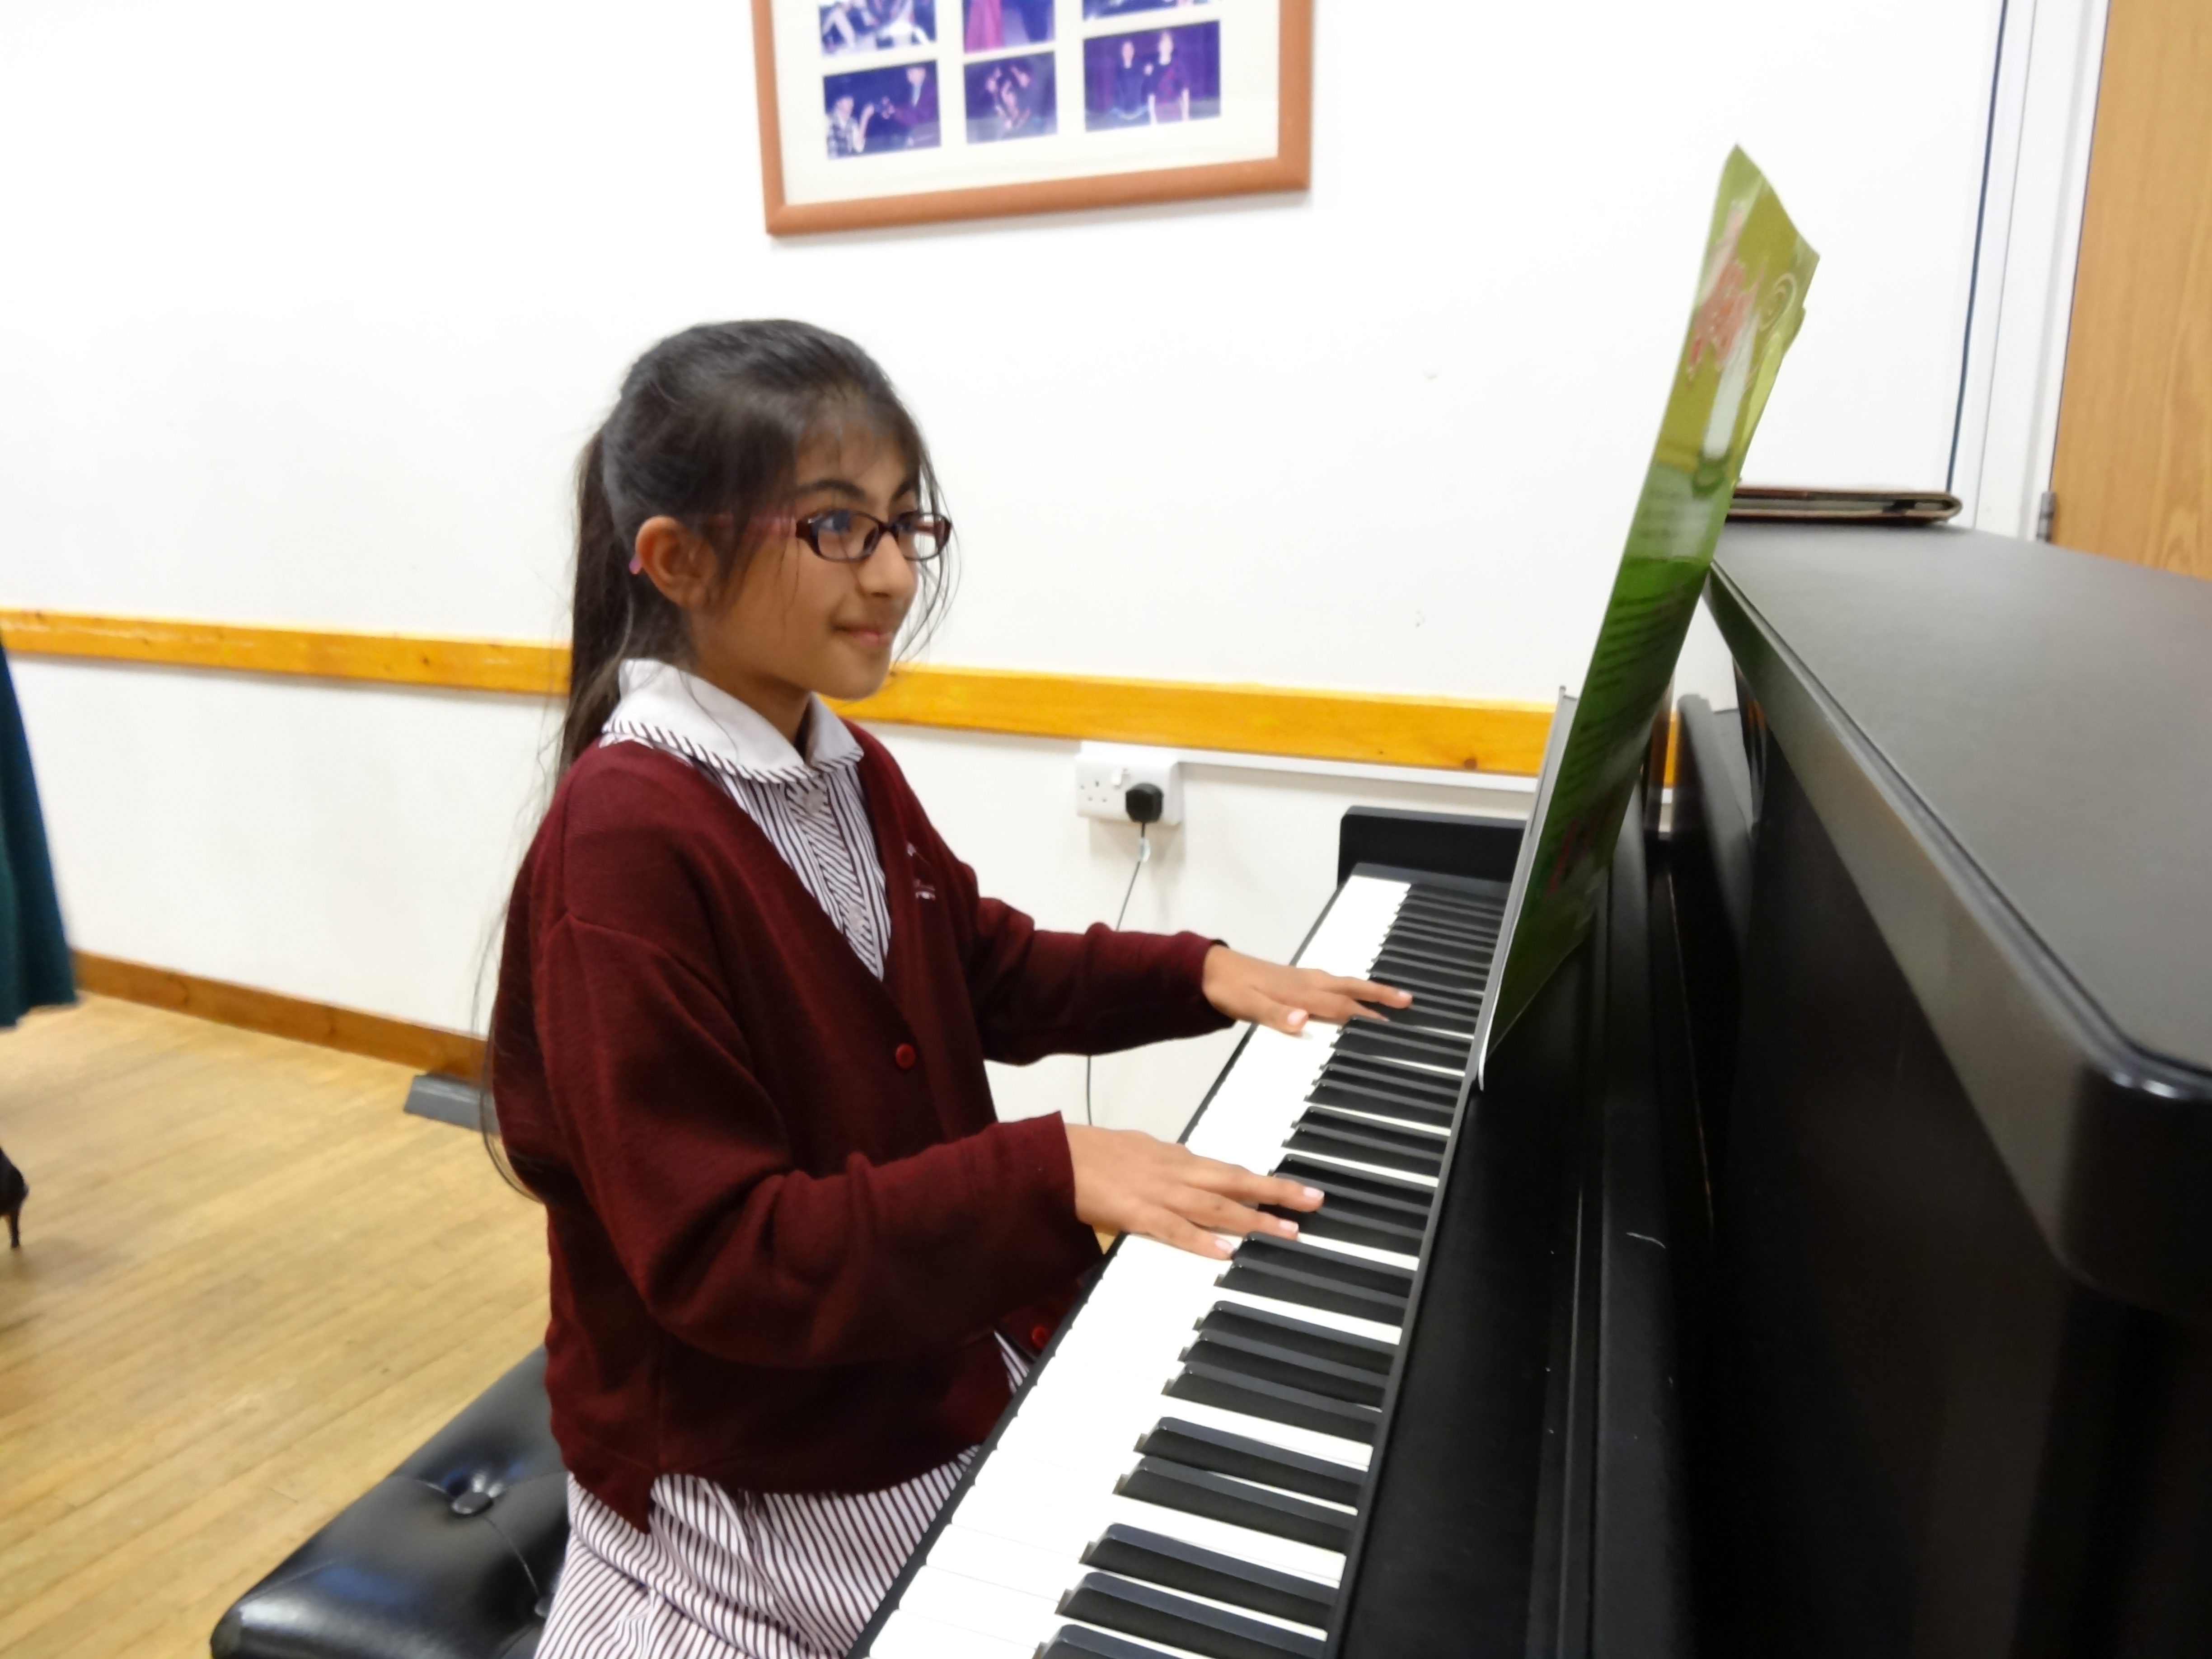 October 2014 - Years 6, 7 and 8 Lunchtime Concert